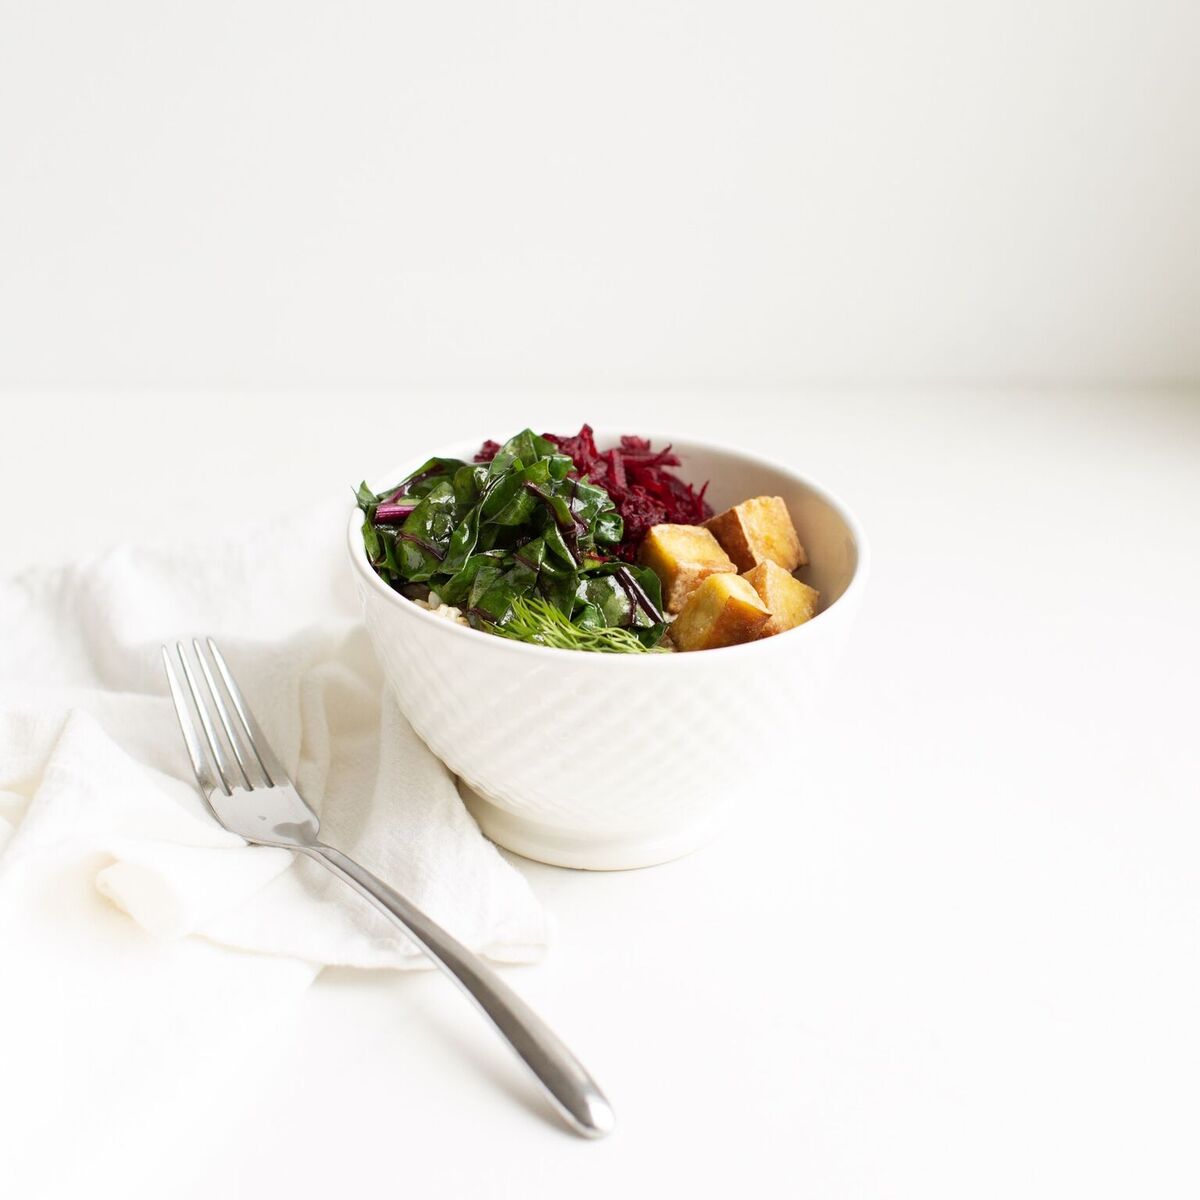 Baba Bowl: a healthy spin on Ukrainian cooking that harnesses all the flavours of Ukrainian cooking in a healthy vegan and gluten free beet and tofu rice bowl.